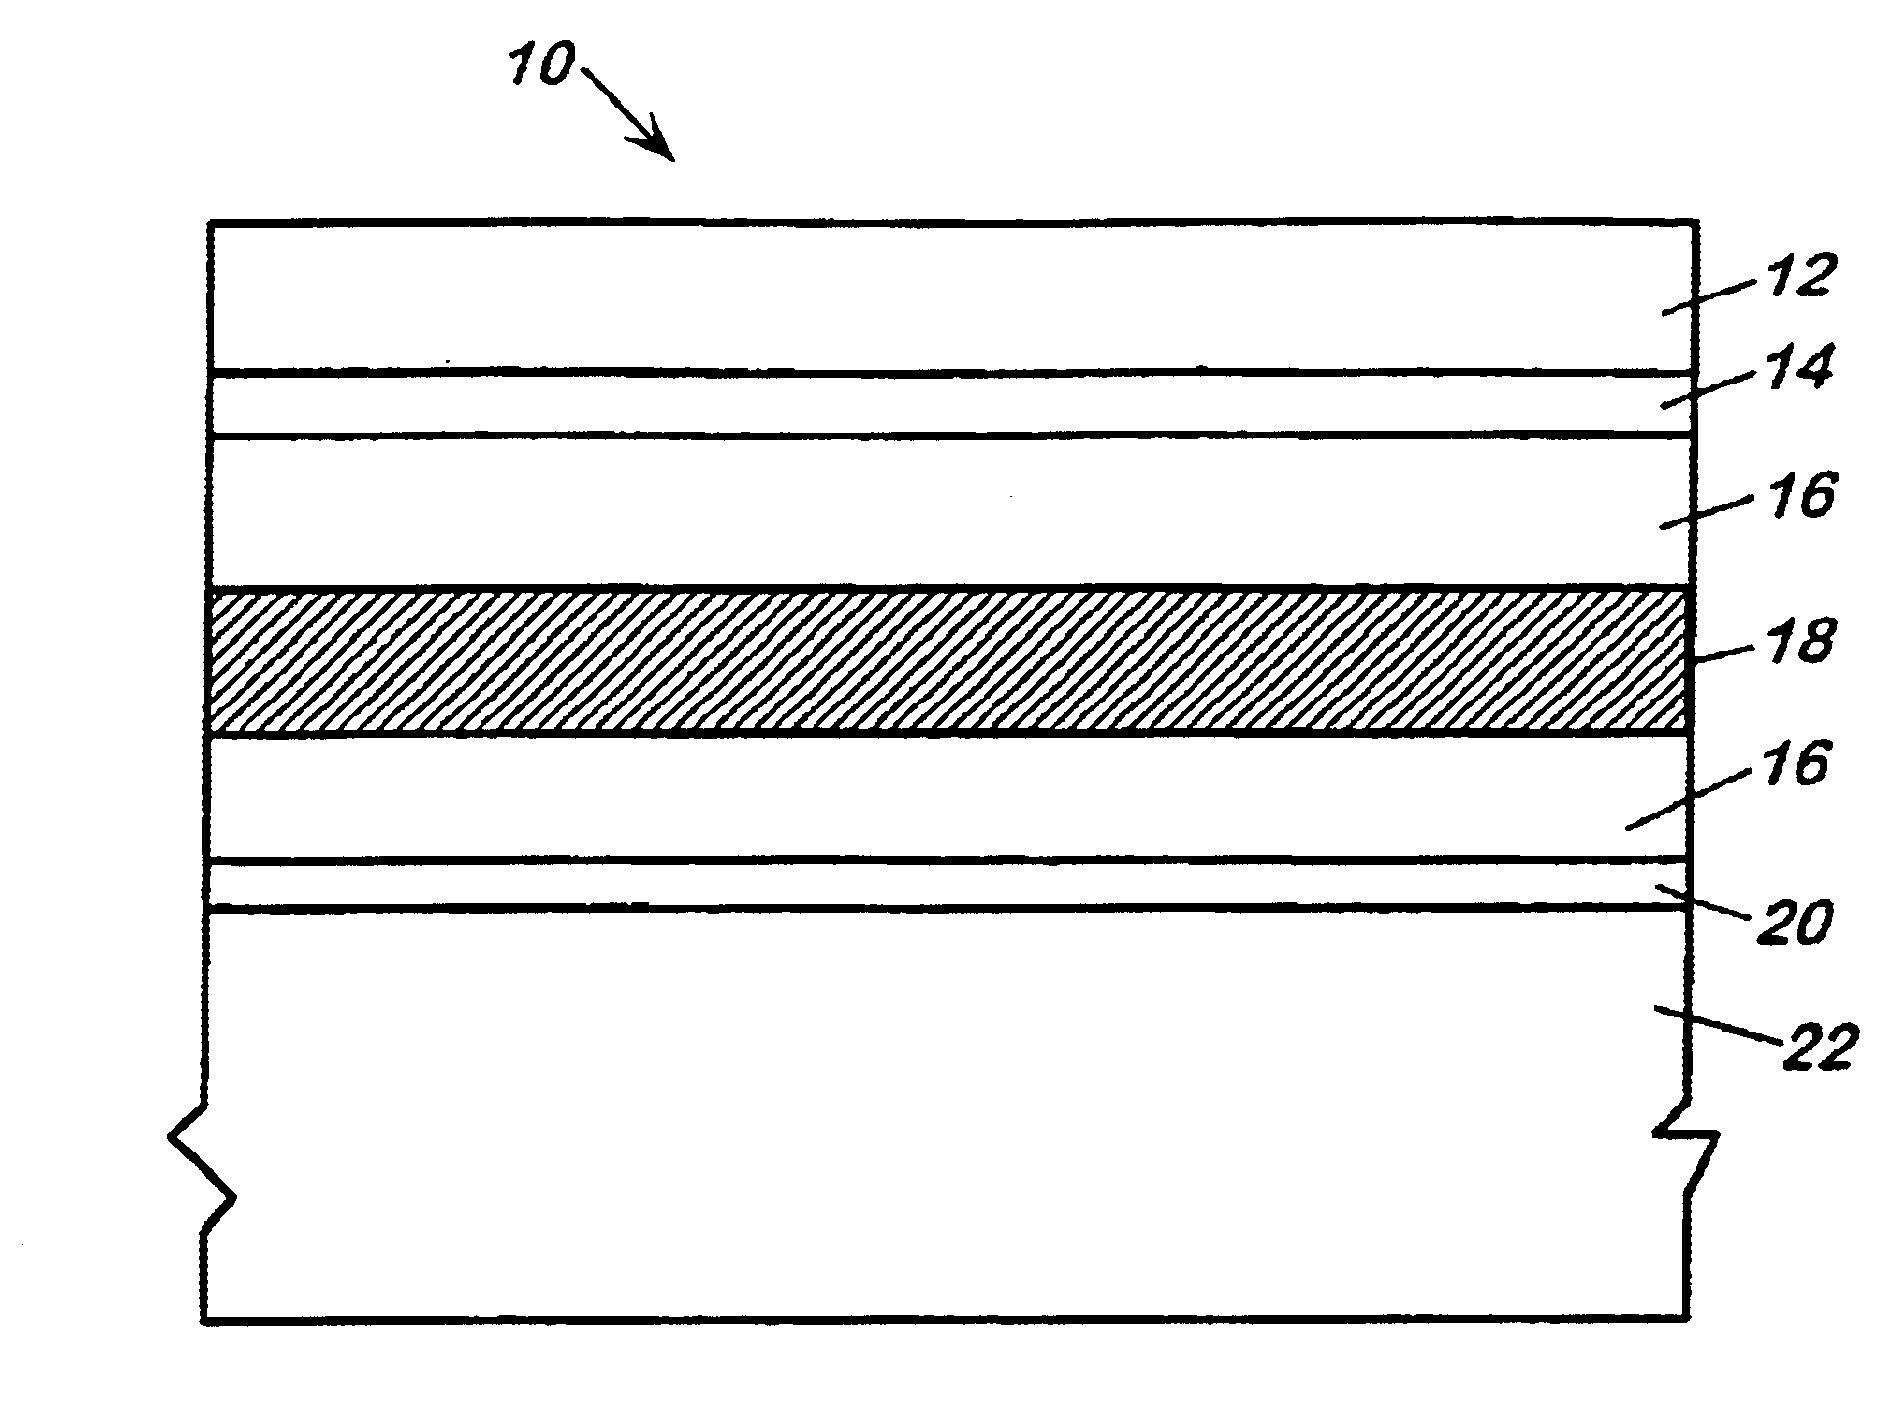 Semiconductor substrate incorporating a neutron conversion layer